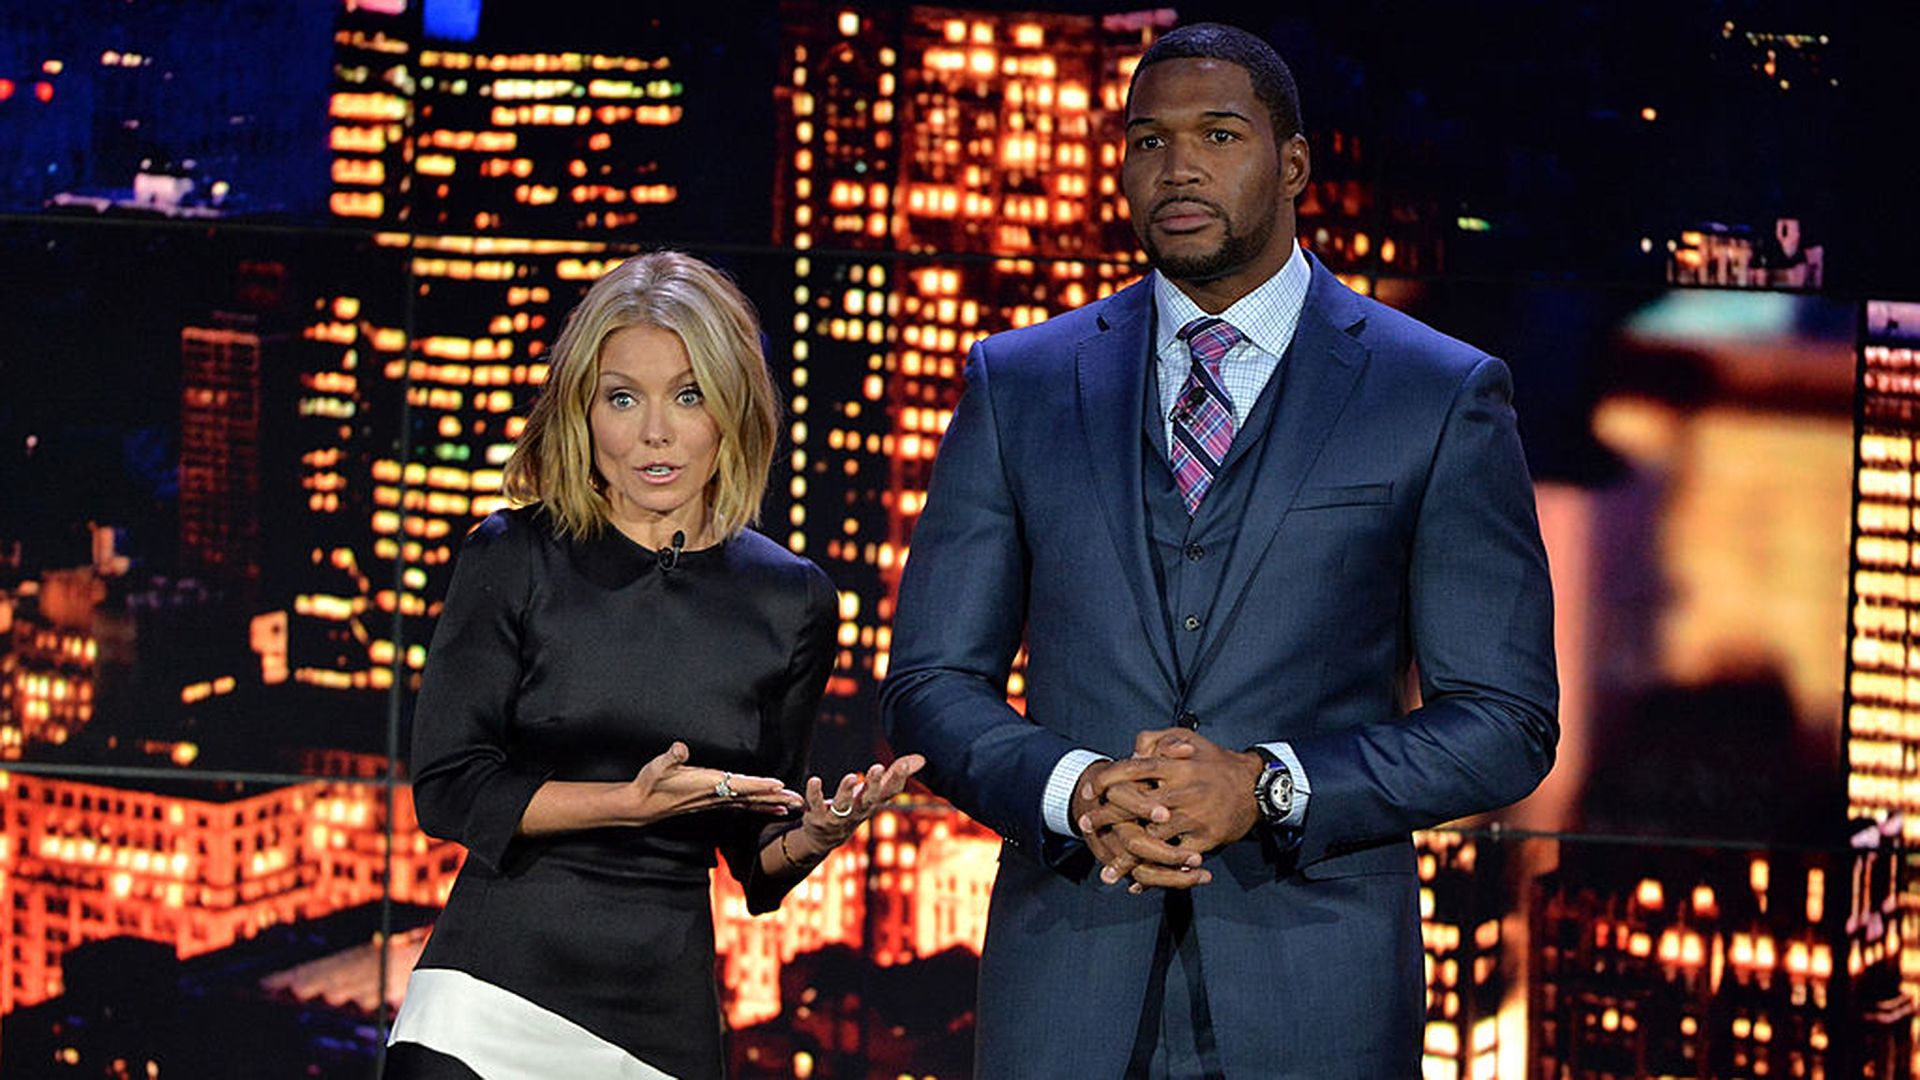 Kelly Ripa and Michael Strahan co-hosting together